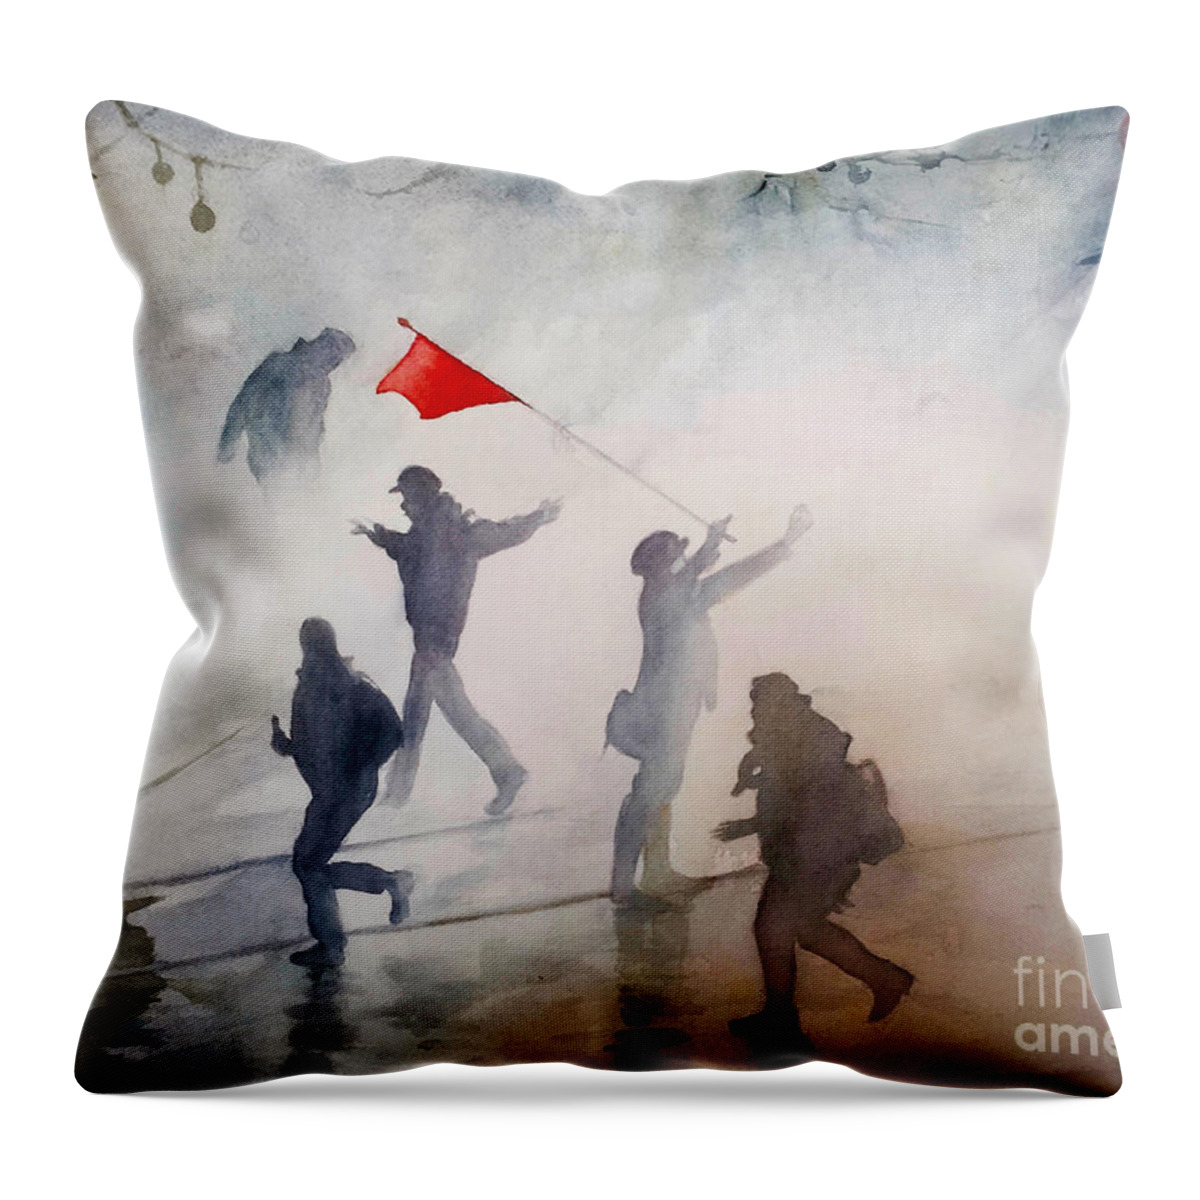 Rebellion Throw Pillow featuring the painting Rebellion by Francoise Chauray